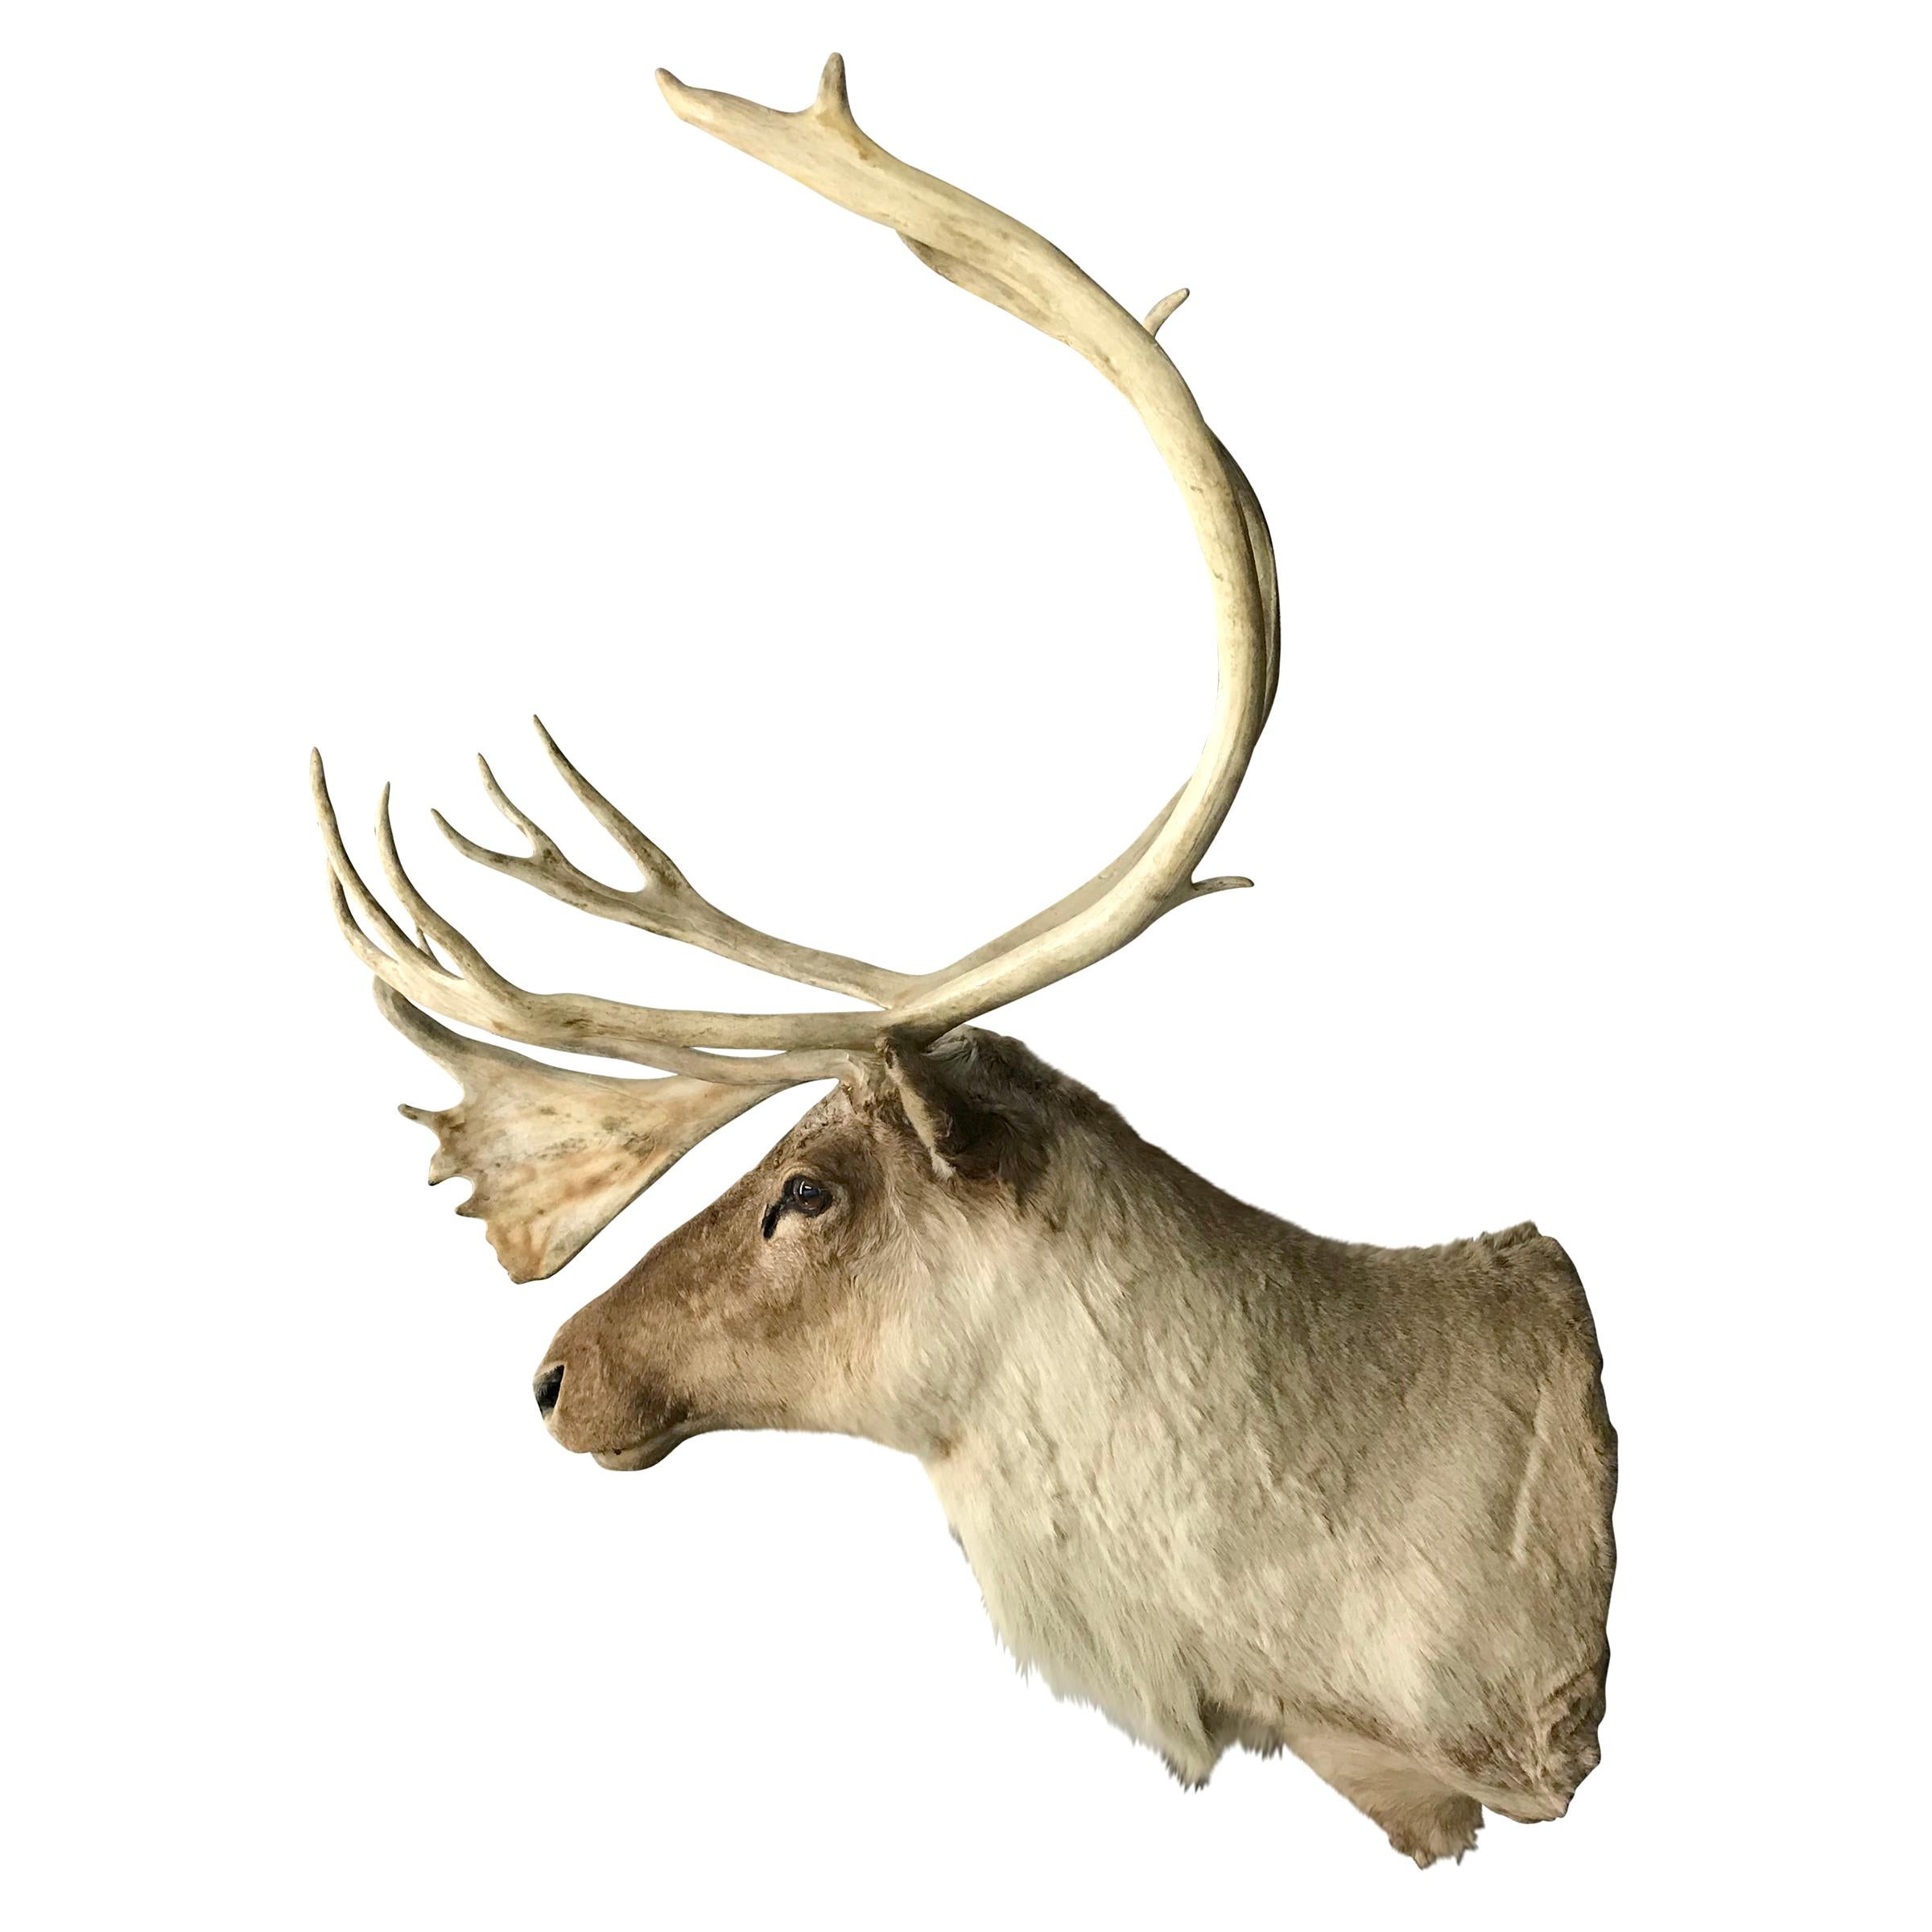 Every cottage needs one of these! A 20th century North American caribou mount with a wonderful expression and a larger-than-life presence.